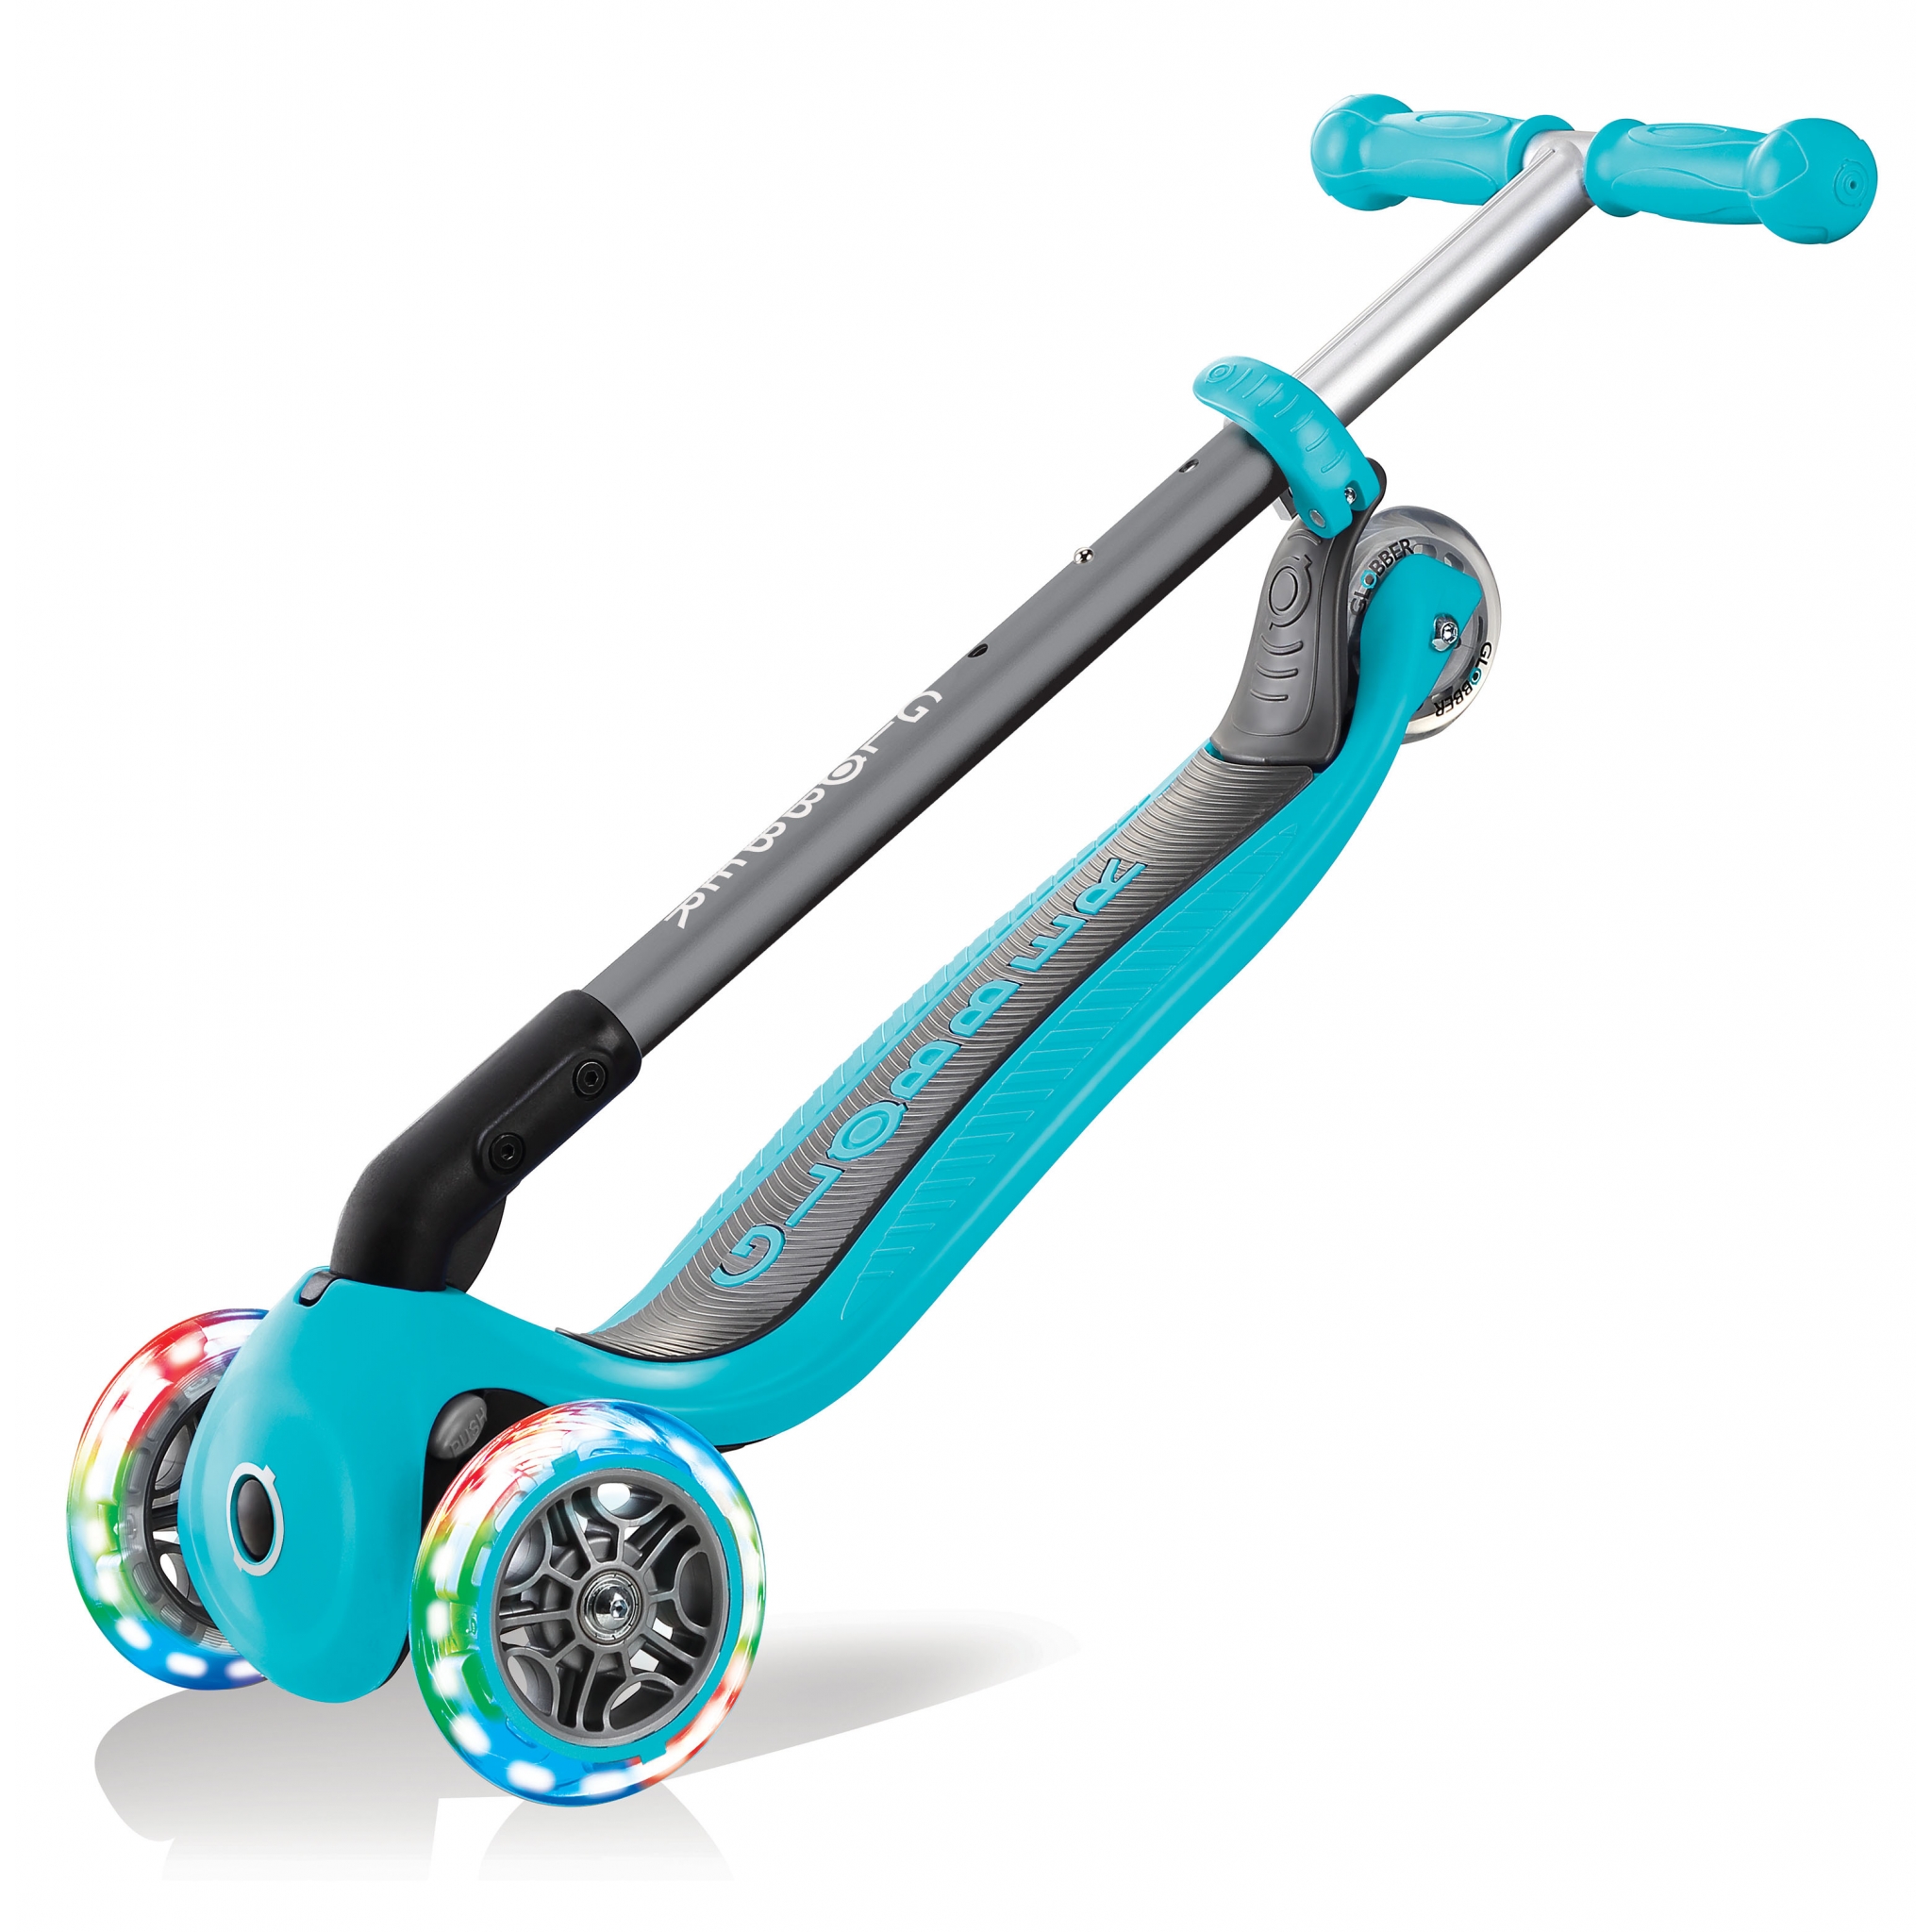 PRIMO-FOLDABLE-LIGHTS-3-wheel-foldable-scooter-for-kids-trolley-mode-teal 2